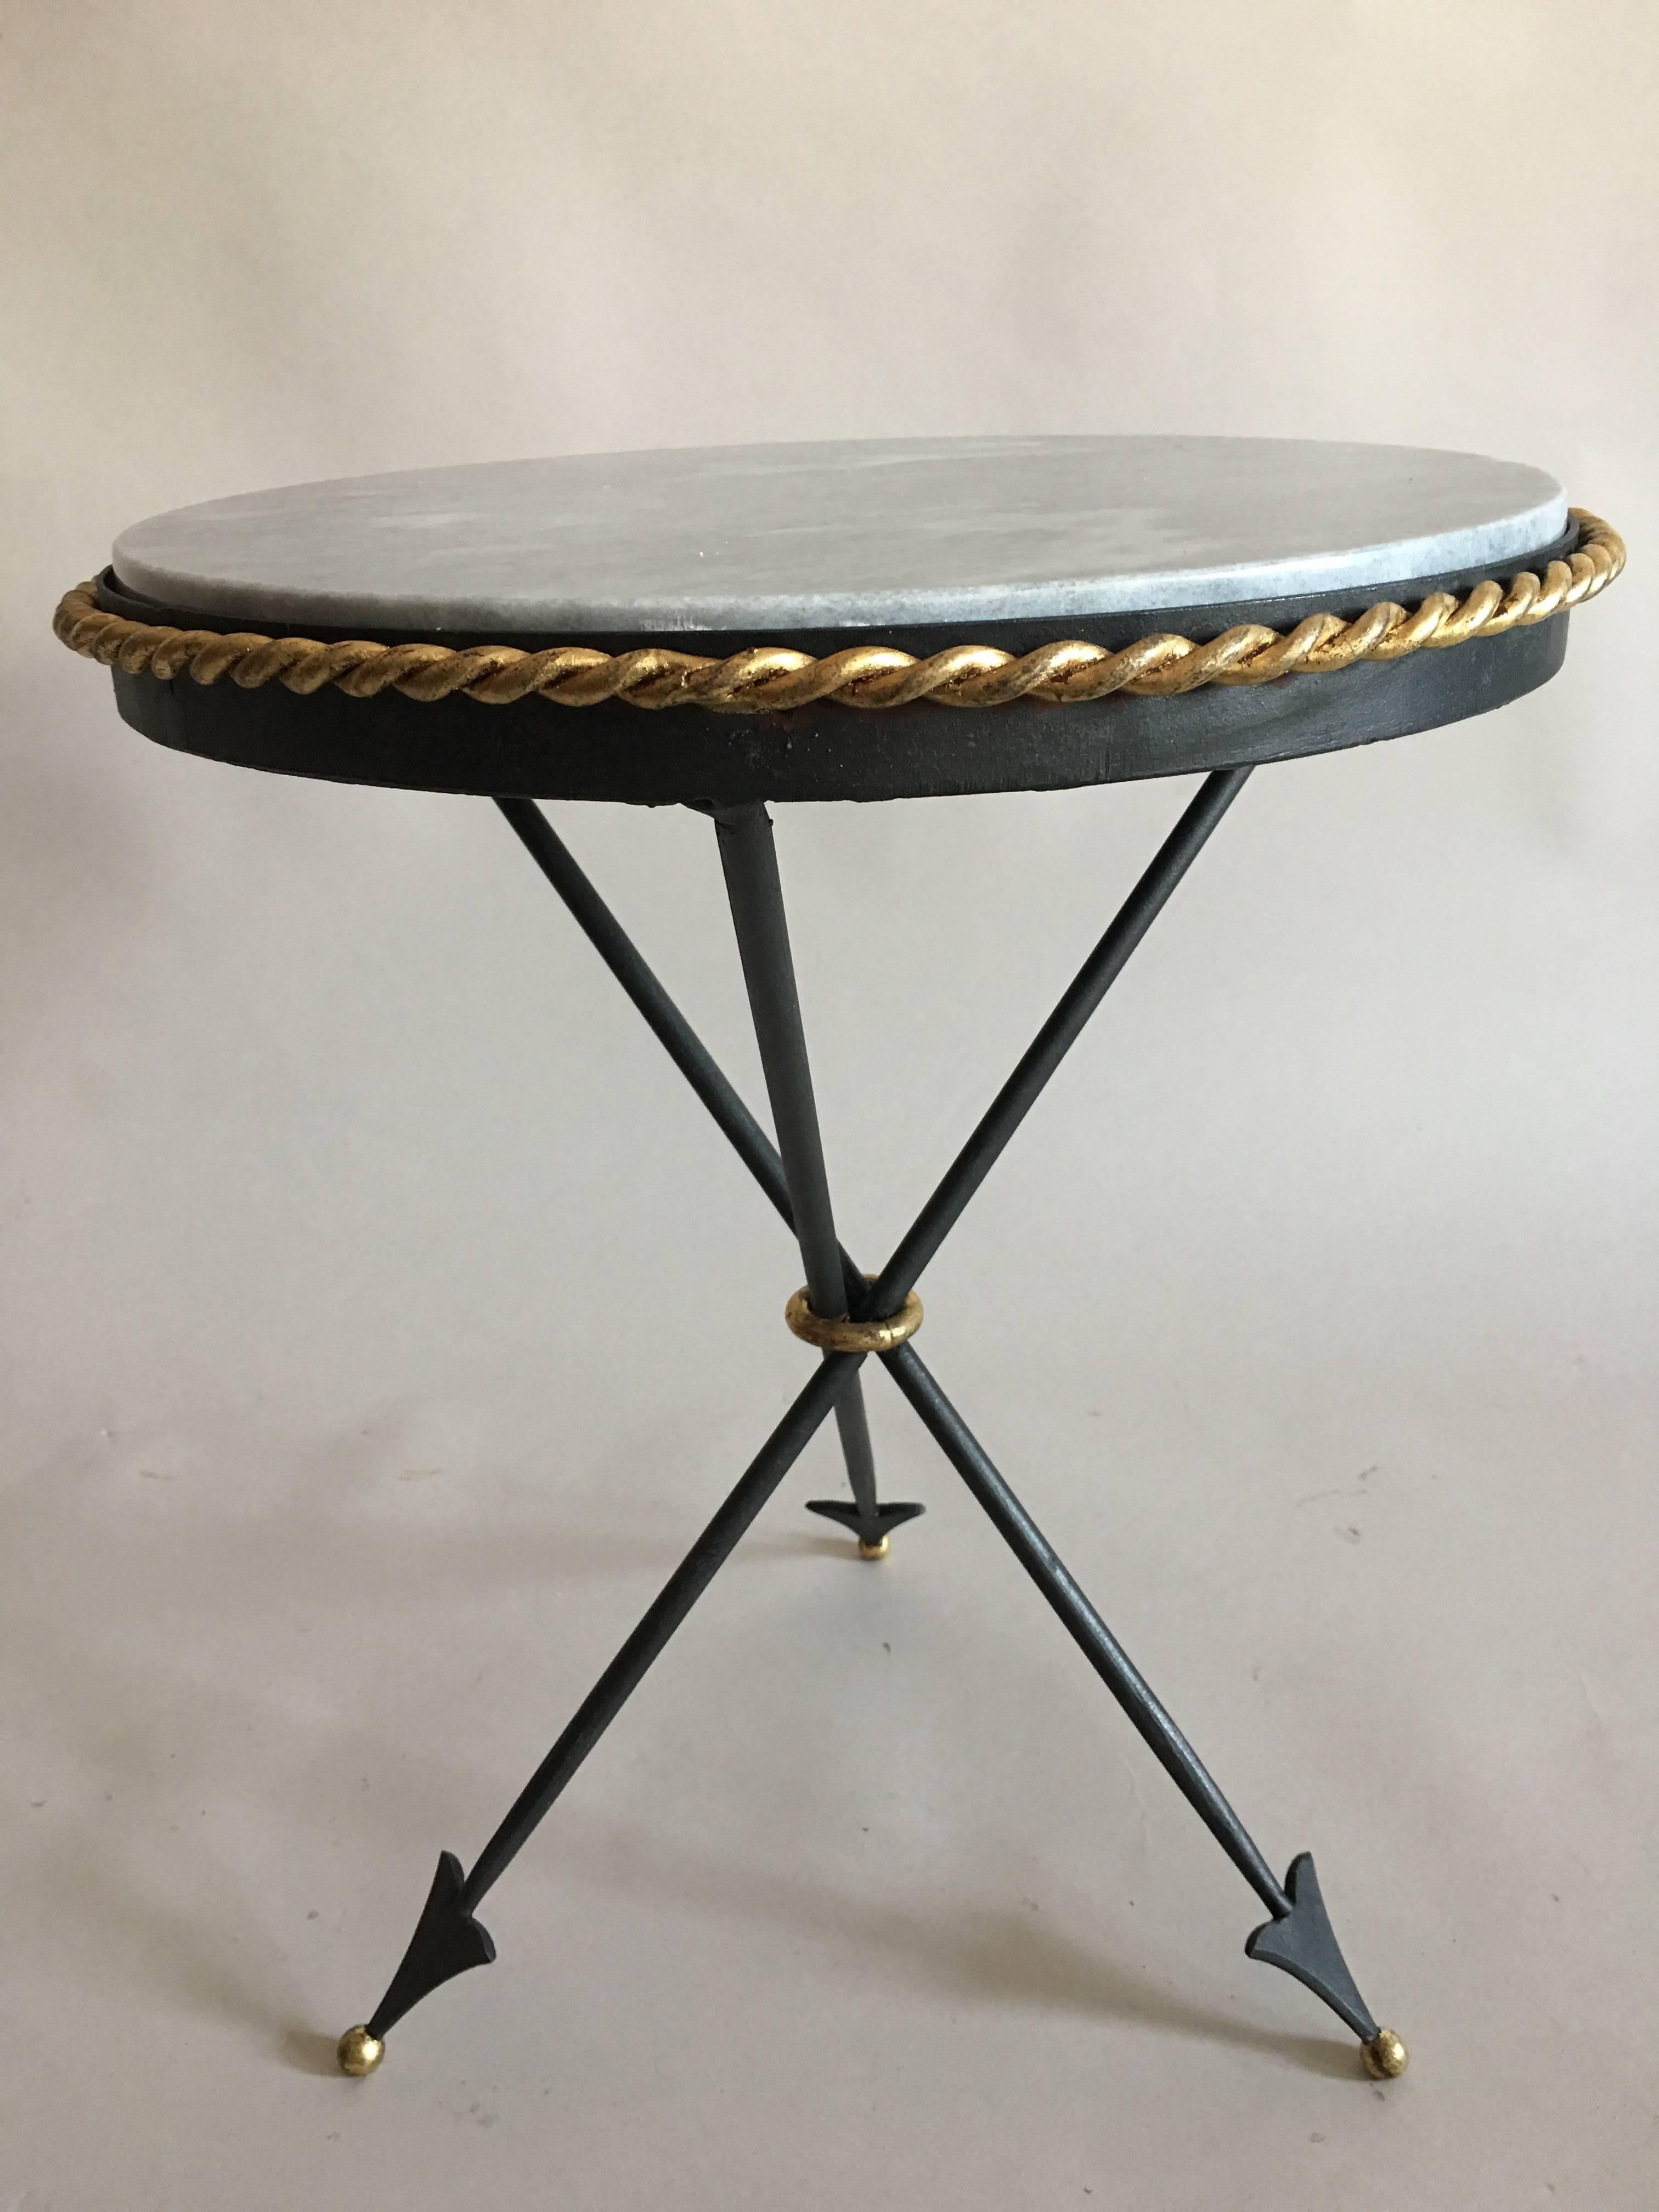 Pair of French Mid-Century Modern Neoclassical Gilt Iron and Marble Side Tables In Good Condition For Sale In New York, NY